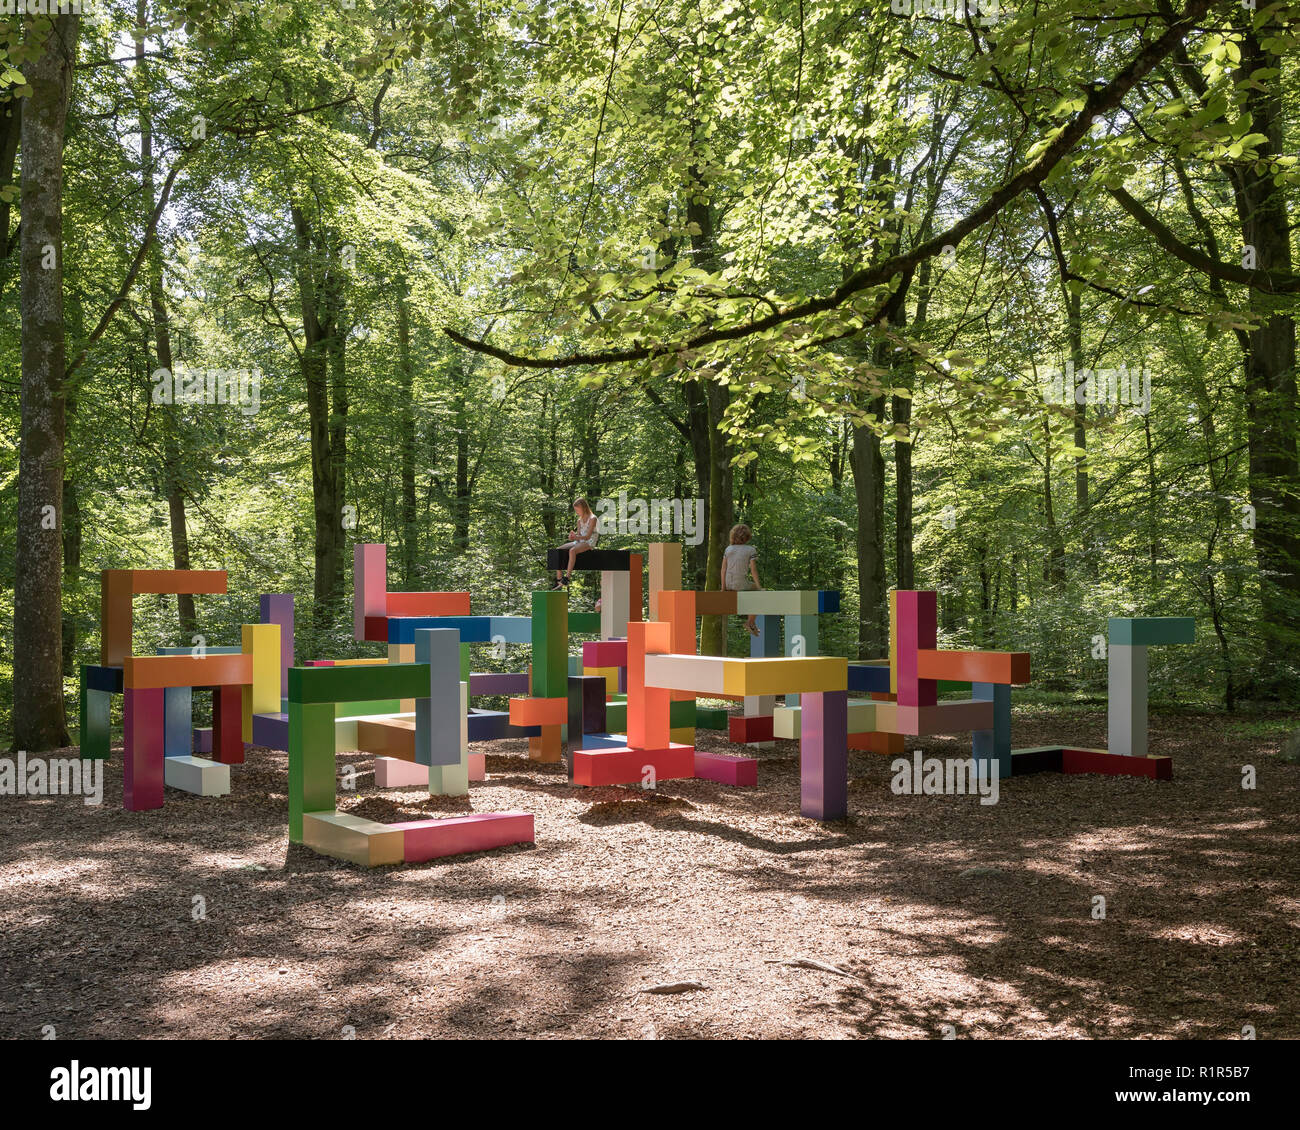 Jacob Dahlgren, Primary Structure, 2011 at The Wanås Foundation. FOR EDITORIAL USE ONLY. Stock Photo